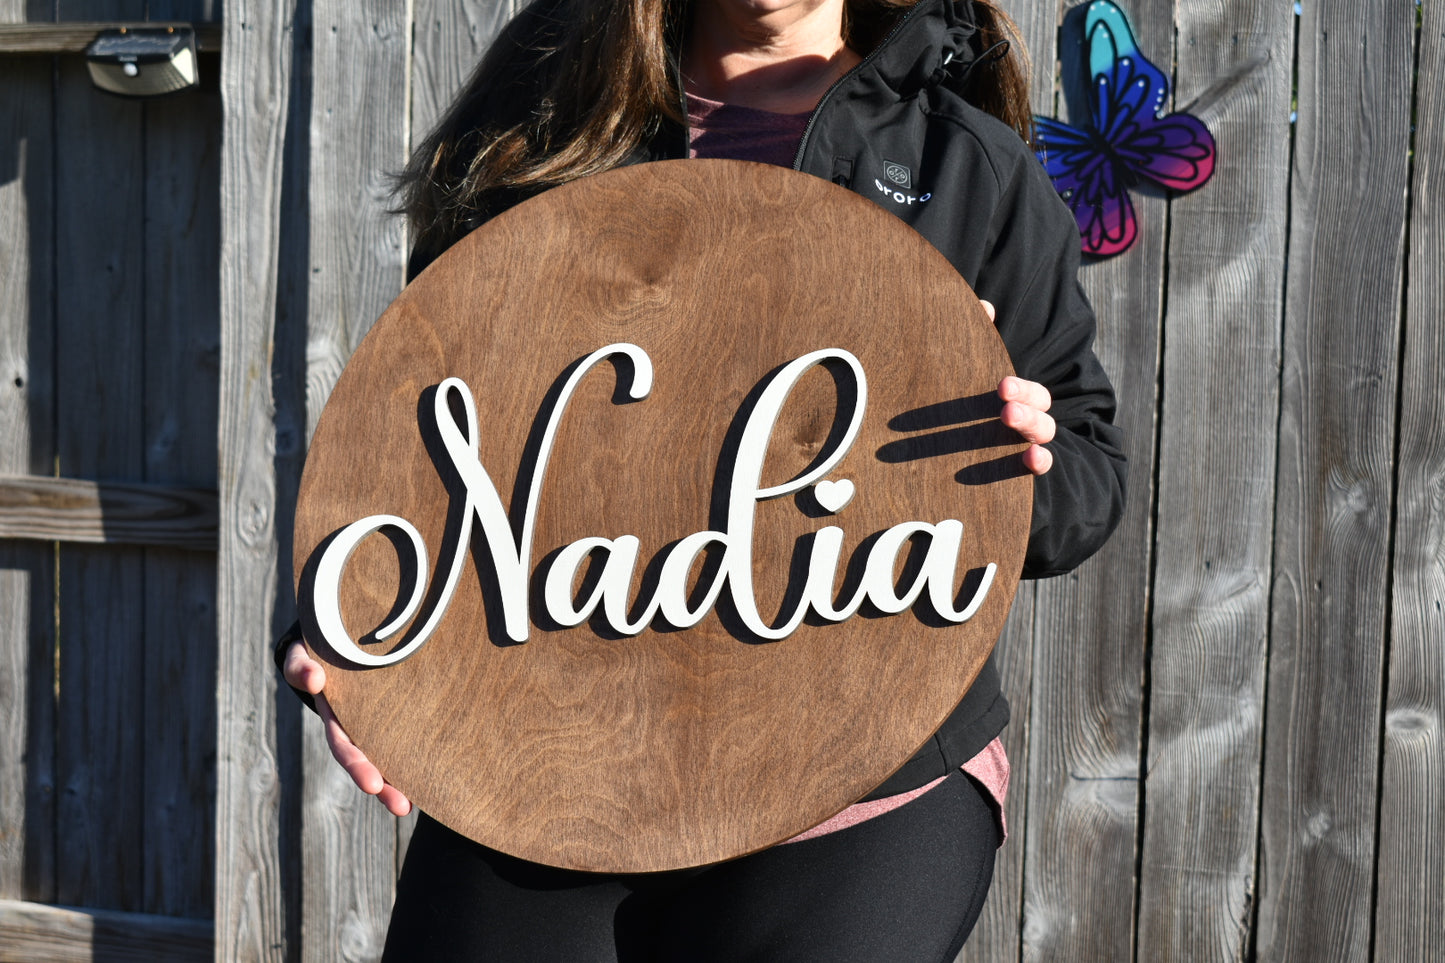 Personalized name sign on circle